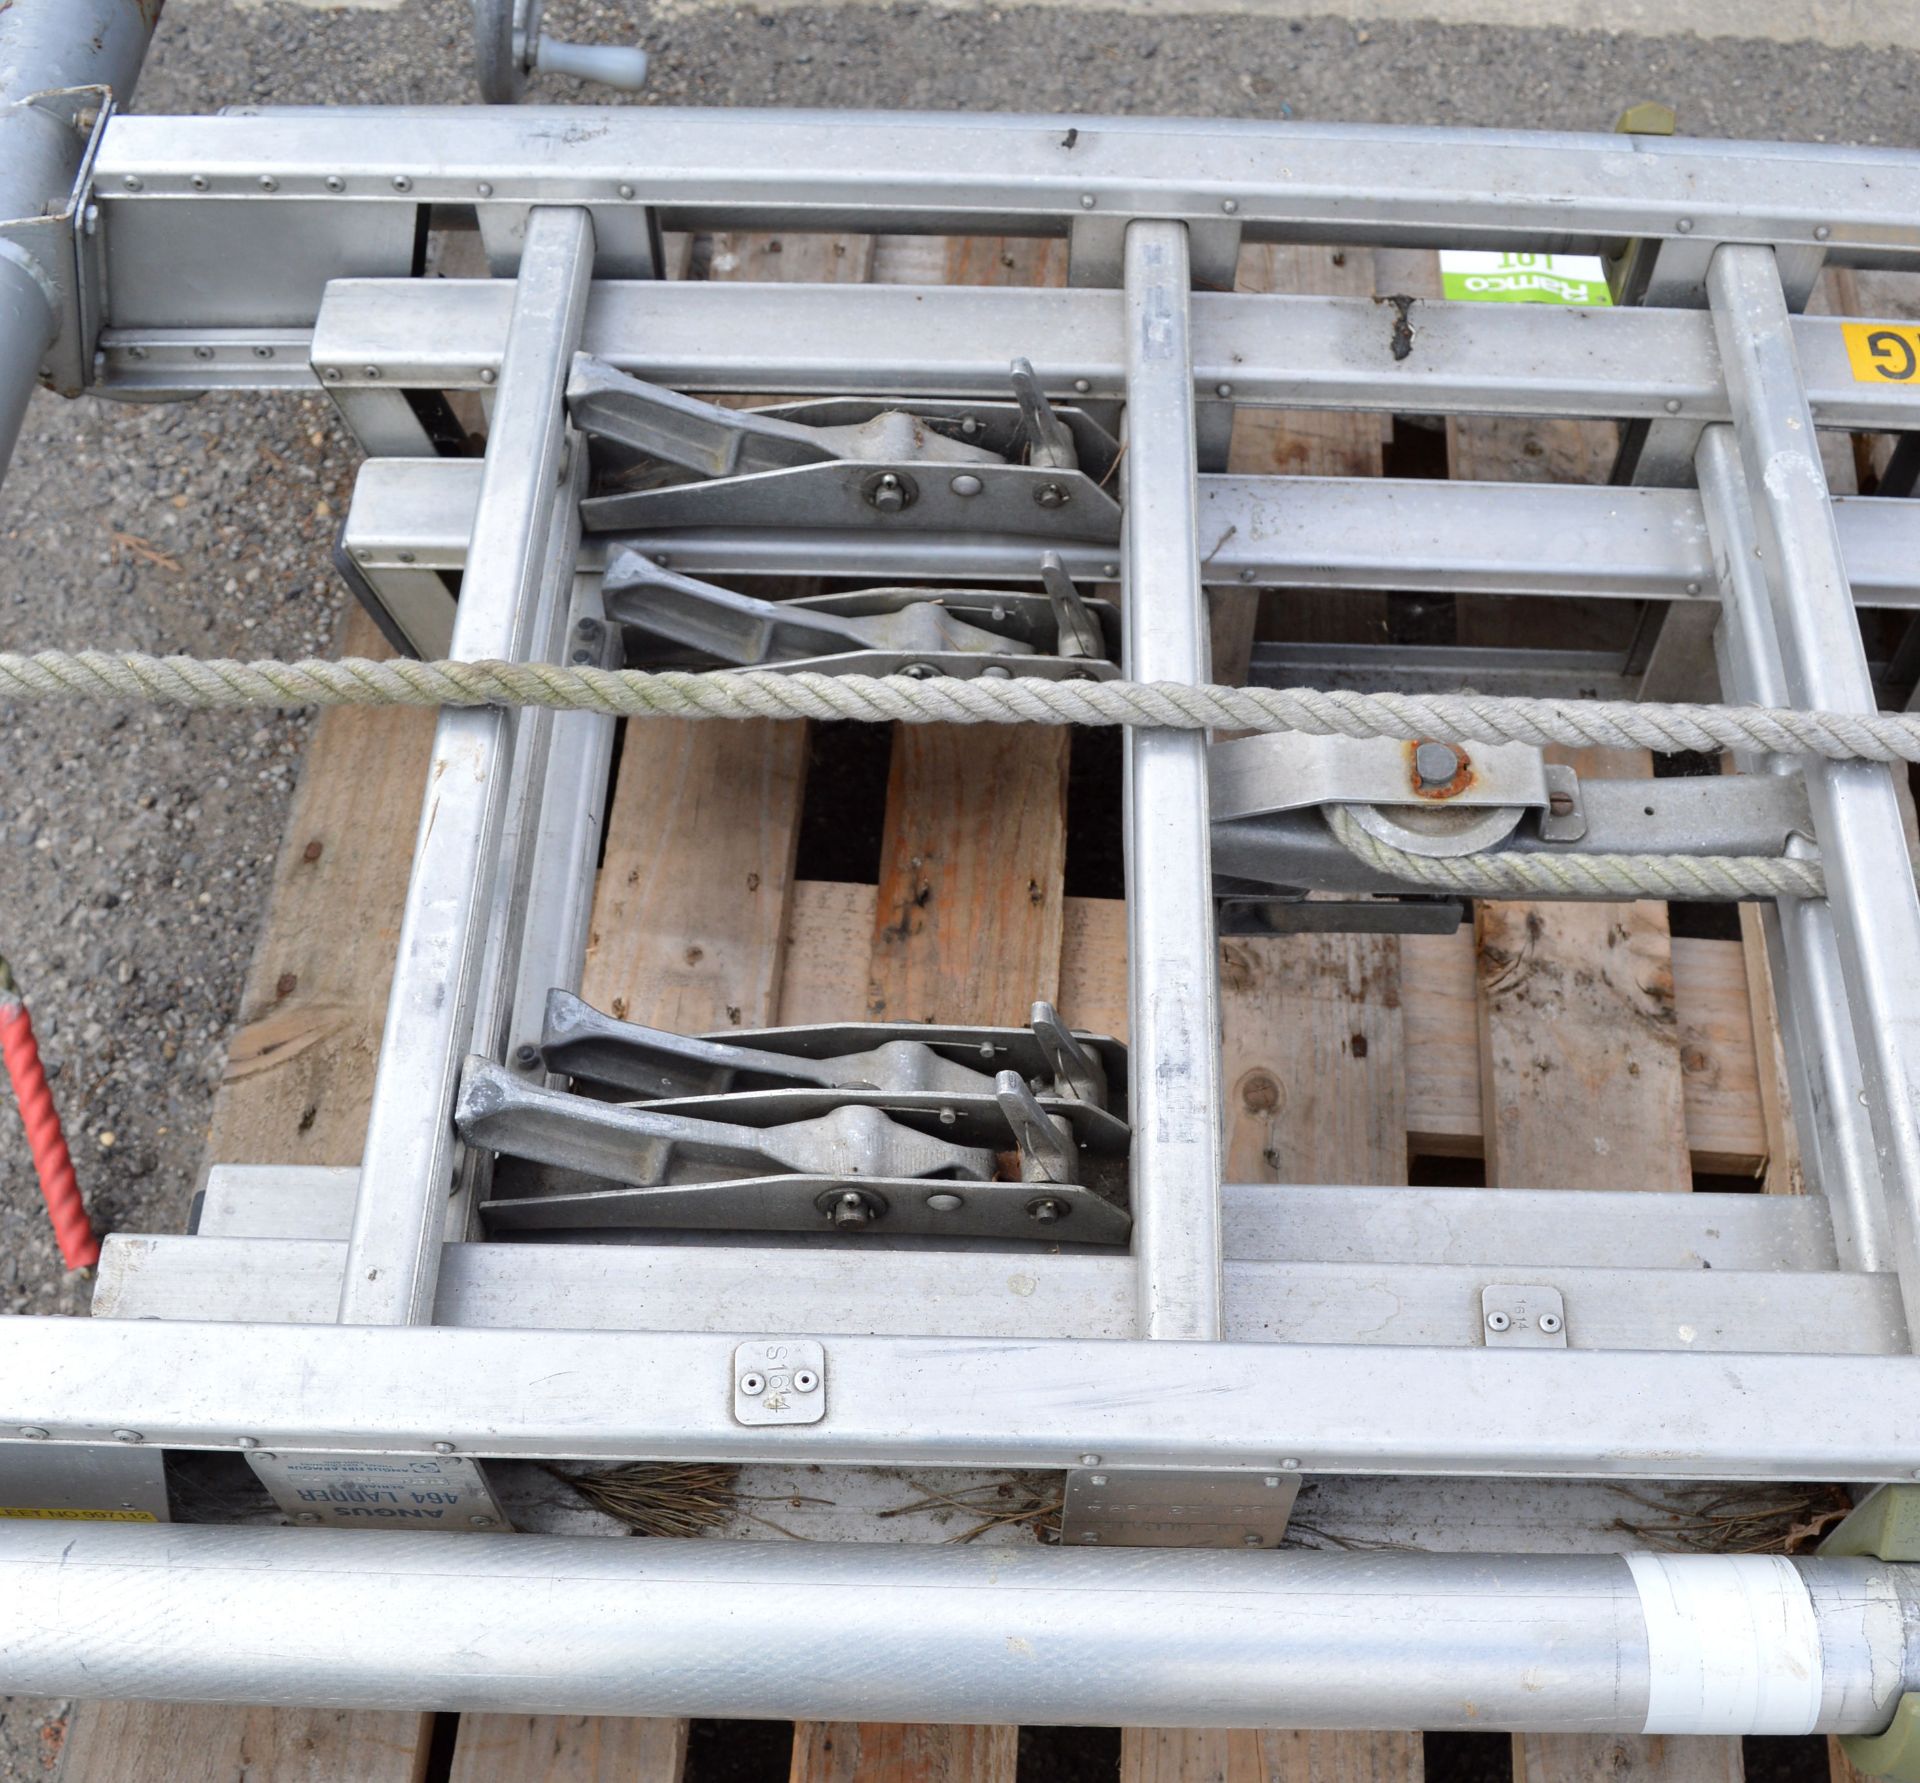 13.5 MTR 3 Section Ladder - 5.8m Unextended. - Image 2 of 2